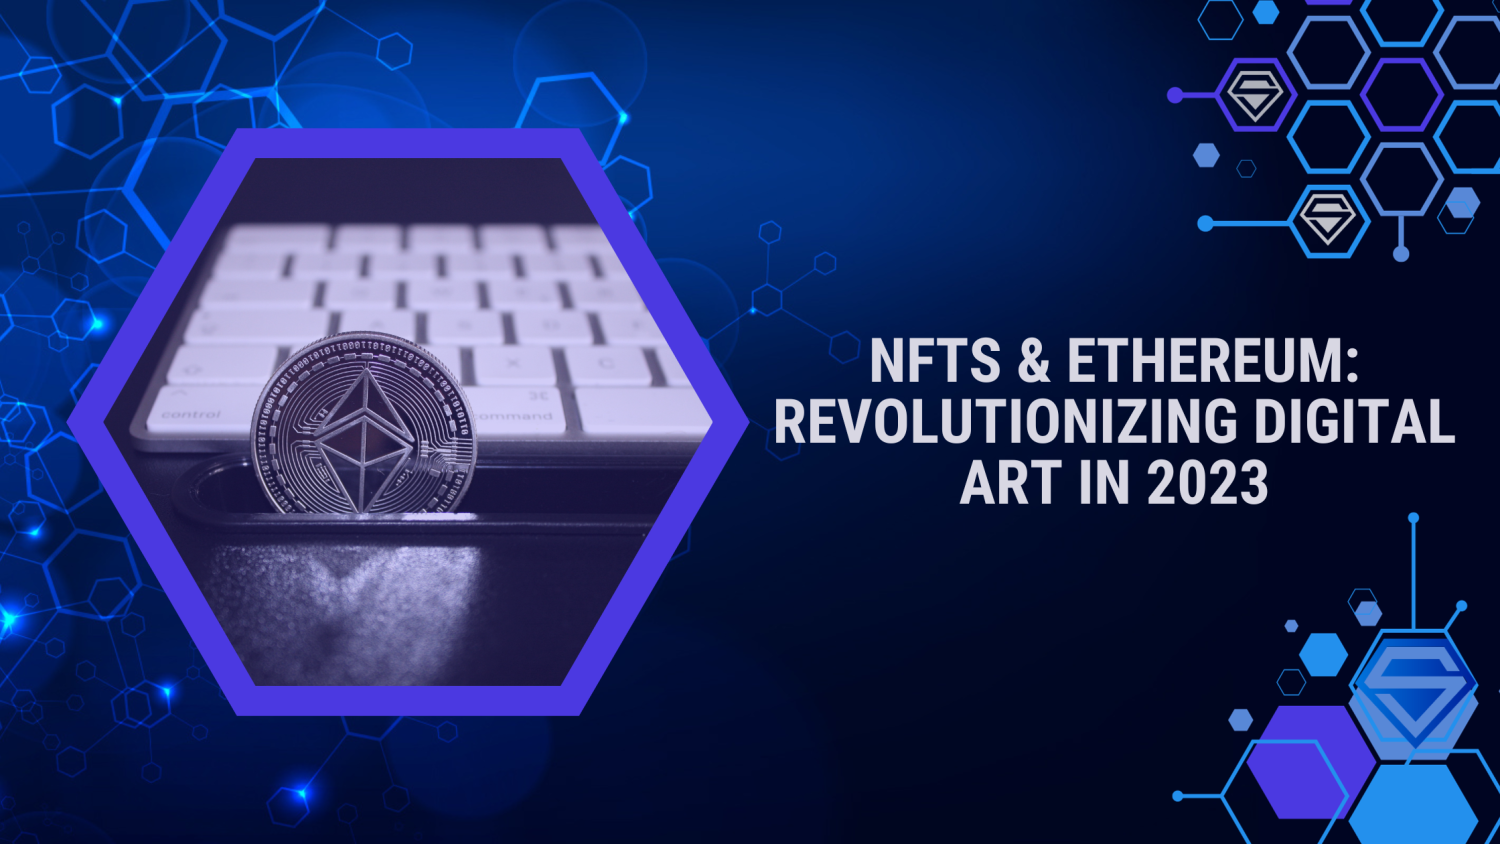 How are NFTs and Ethereum changing the Face of Digital Art?